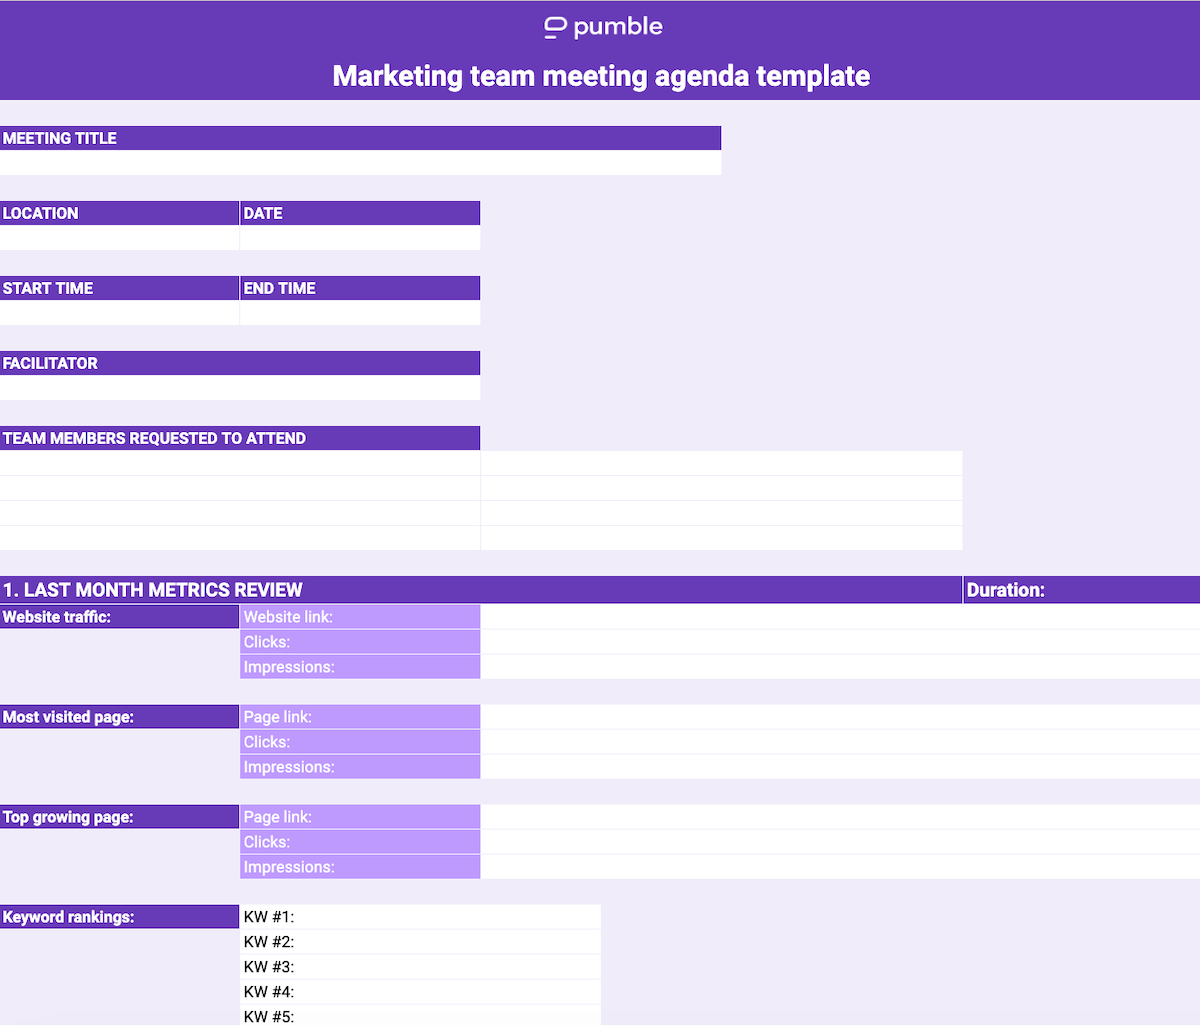 An example of a marketing team meeting agenda template